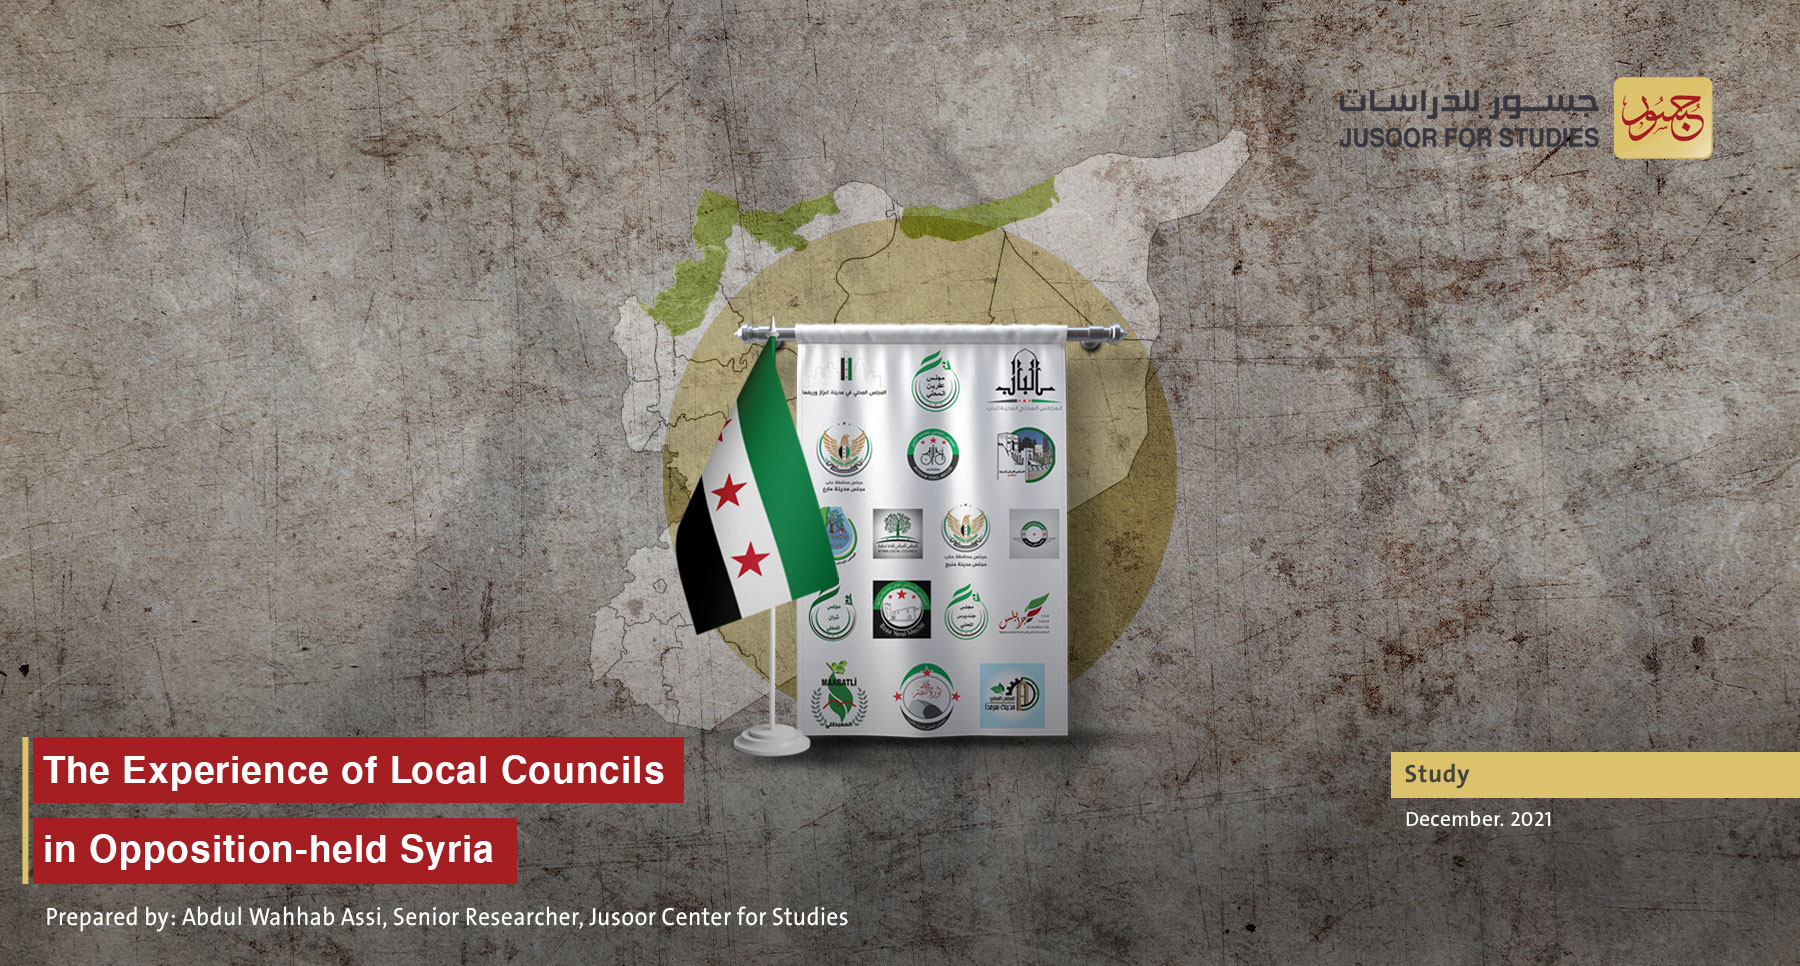 The Experience of Local Councils in Opposition-held Syria